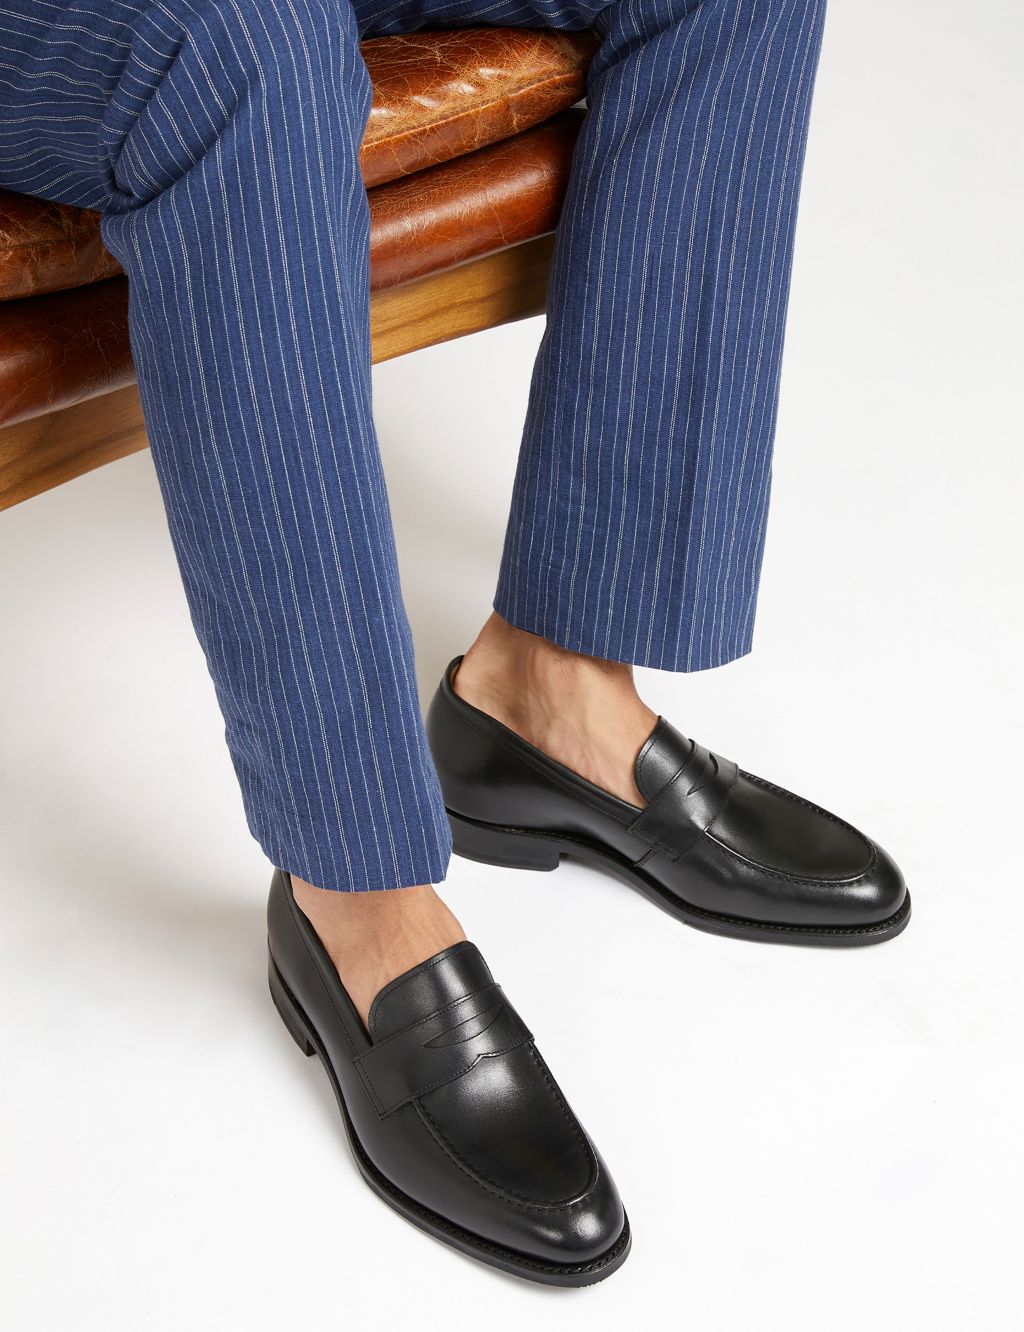 Leather Goodyear Welted Slip-On Loafers | Jones Bootmaker | M&S